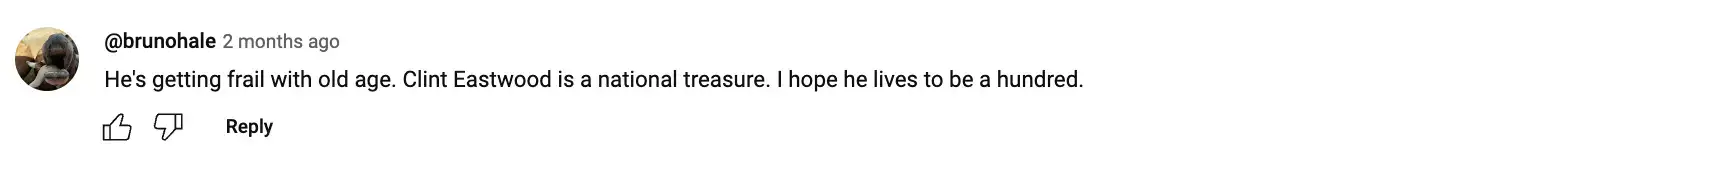 Comments about Clint Eastwood | Source: Youtube.com/WJCL News